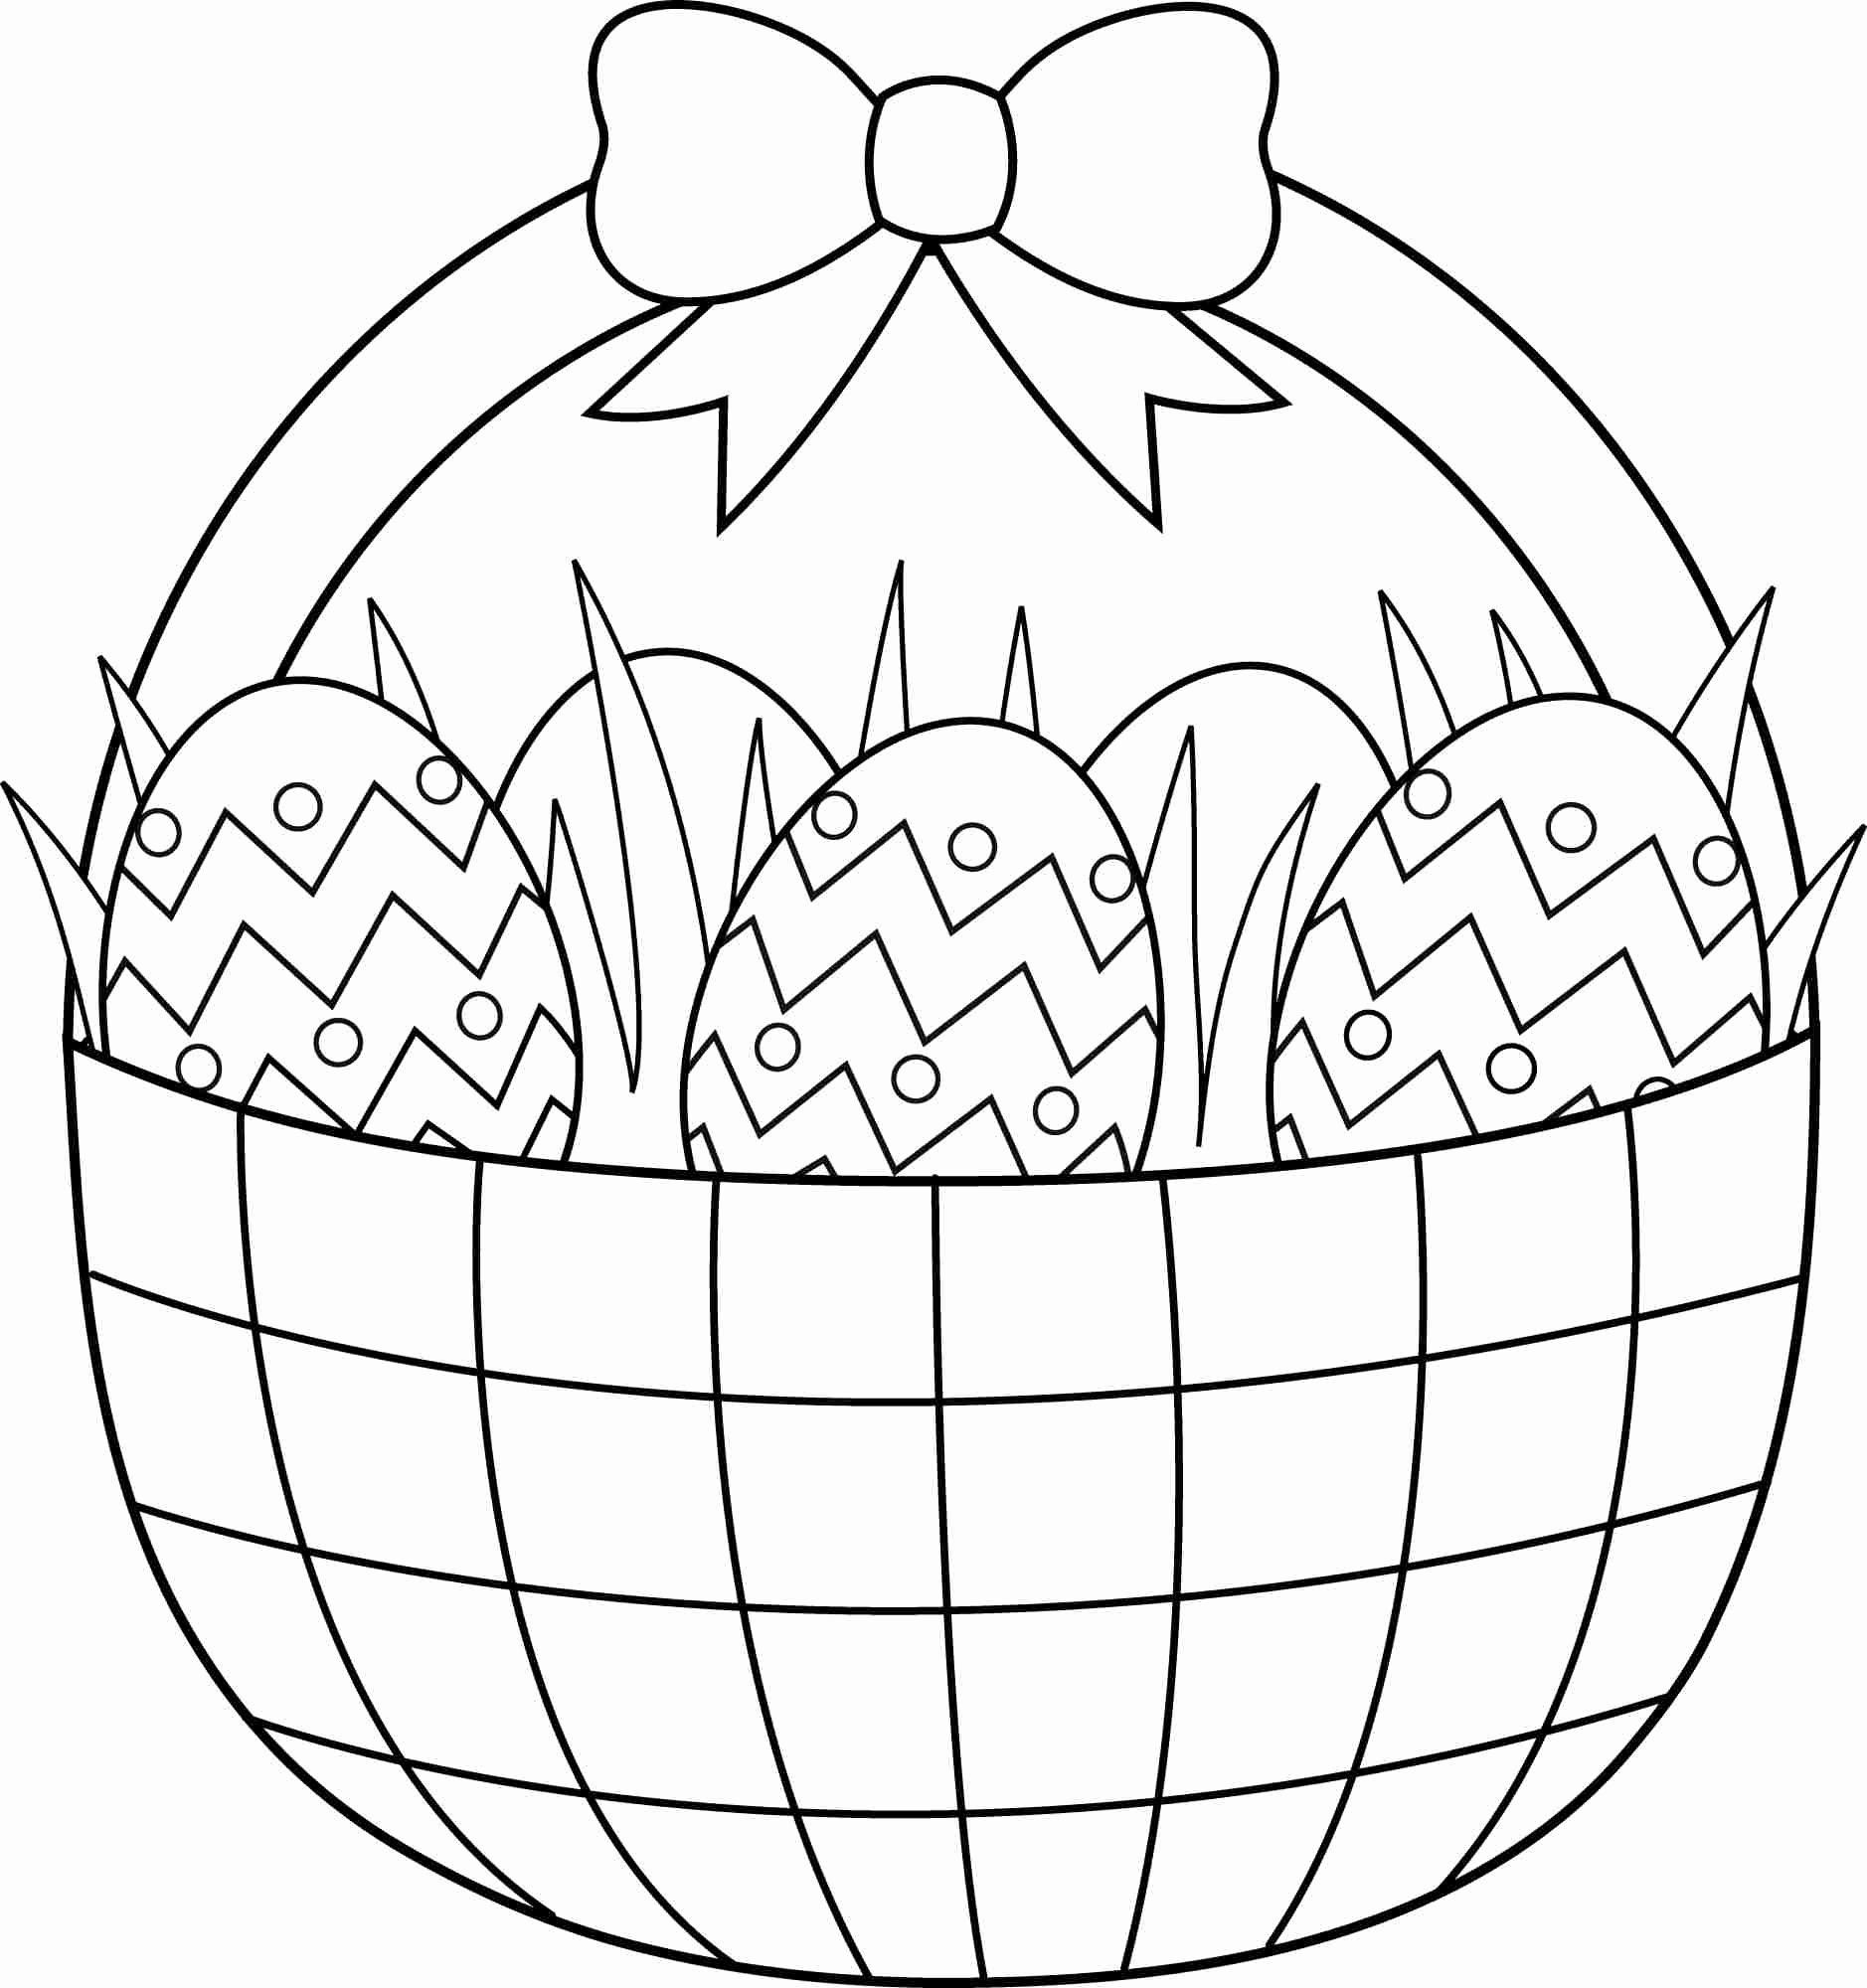 Coloring Book World: 69 Extraordinary Easter Coloring Pages Picture - Free Printable Easter Pages